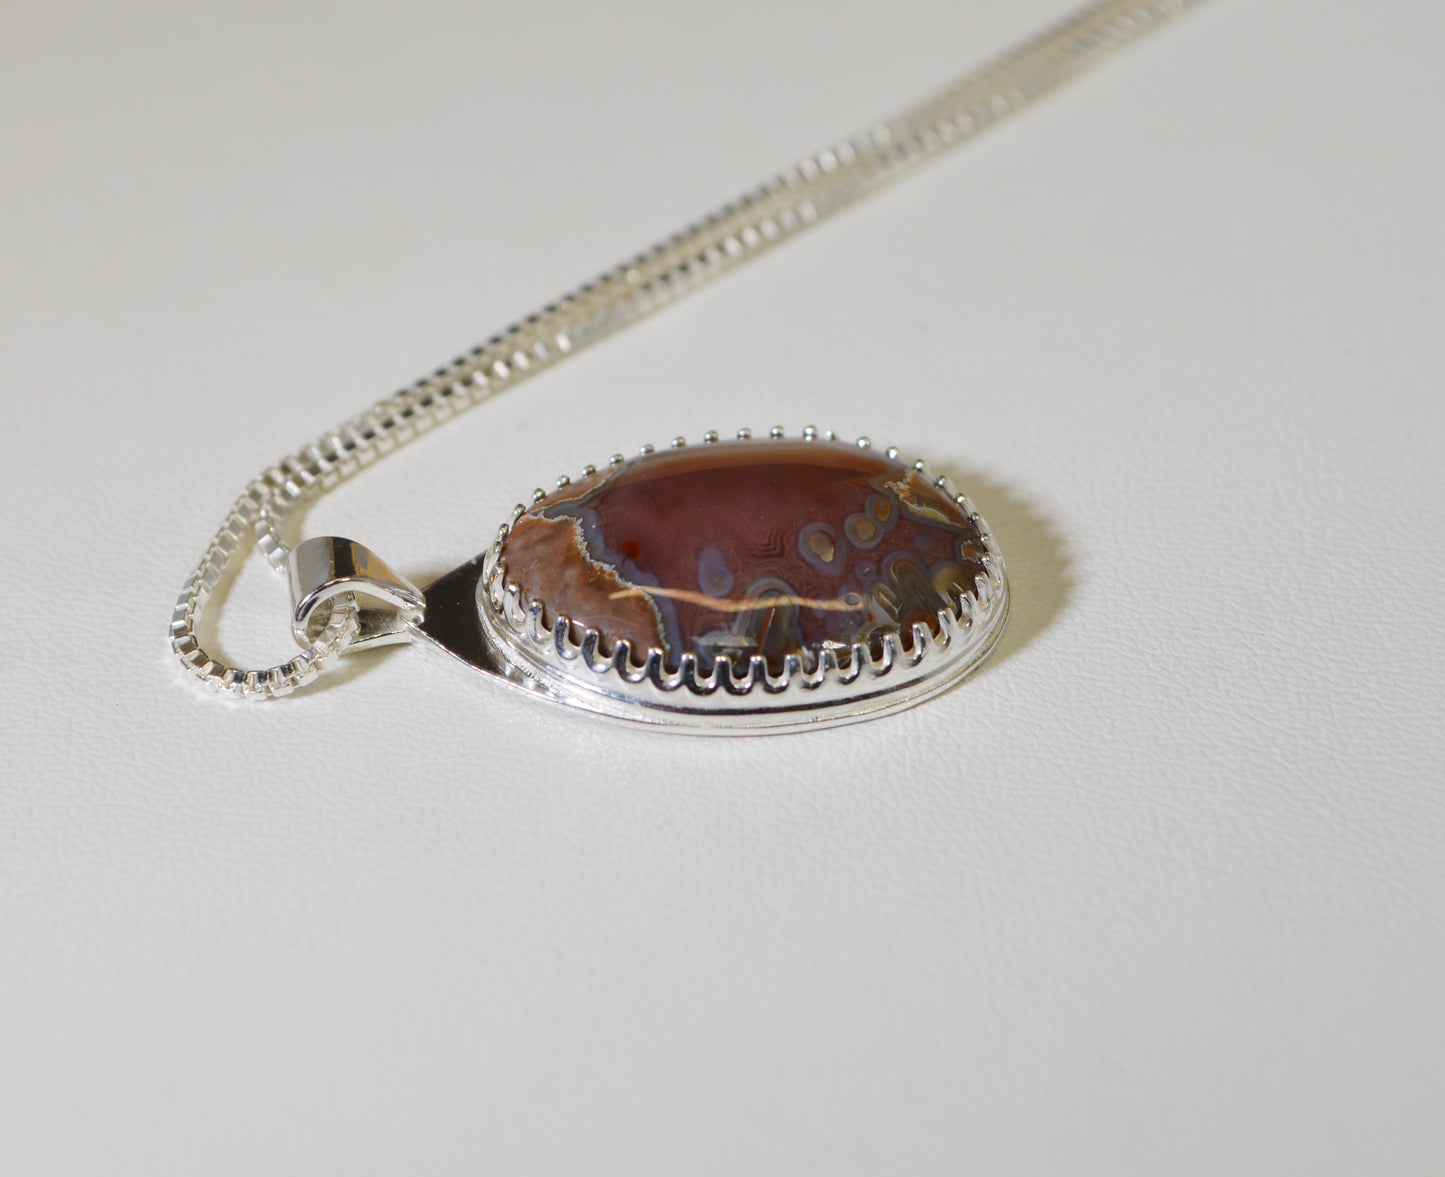 Agate Necklace, Silver Solid 925, Agate Silver Necklace, Baker Thunder Egg, New Mexico Agate Geode, Artisan Handmade Silver Agate Necklace